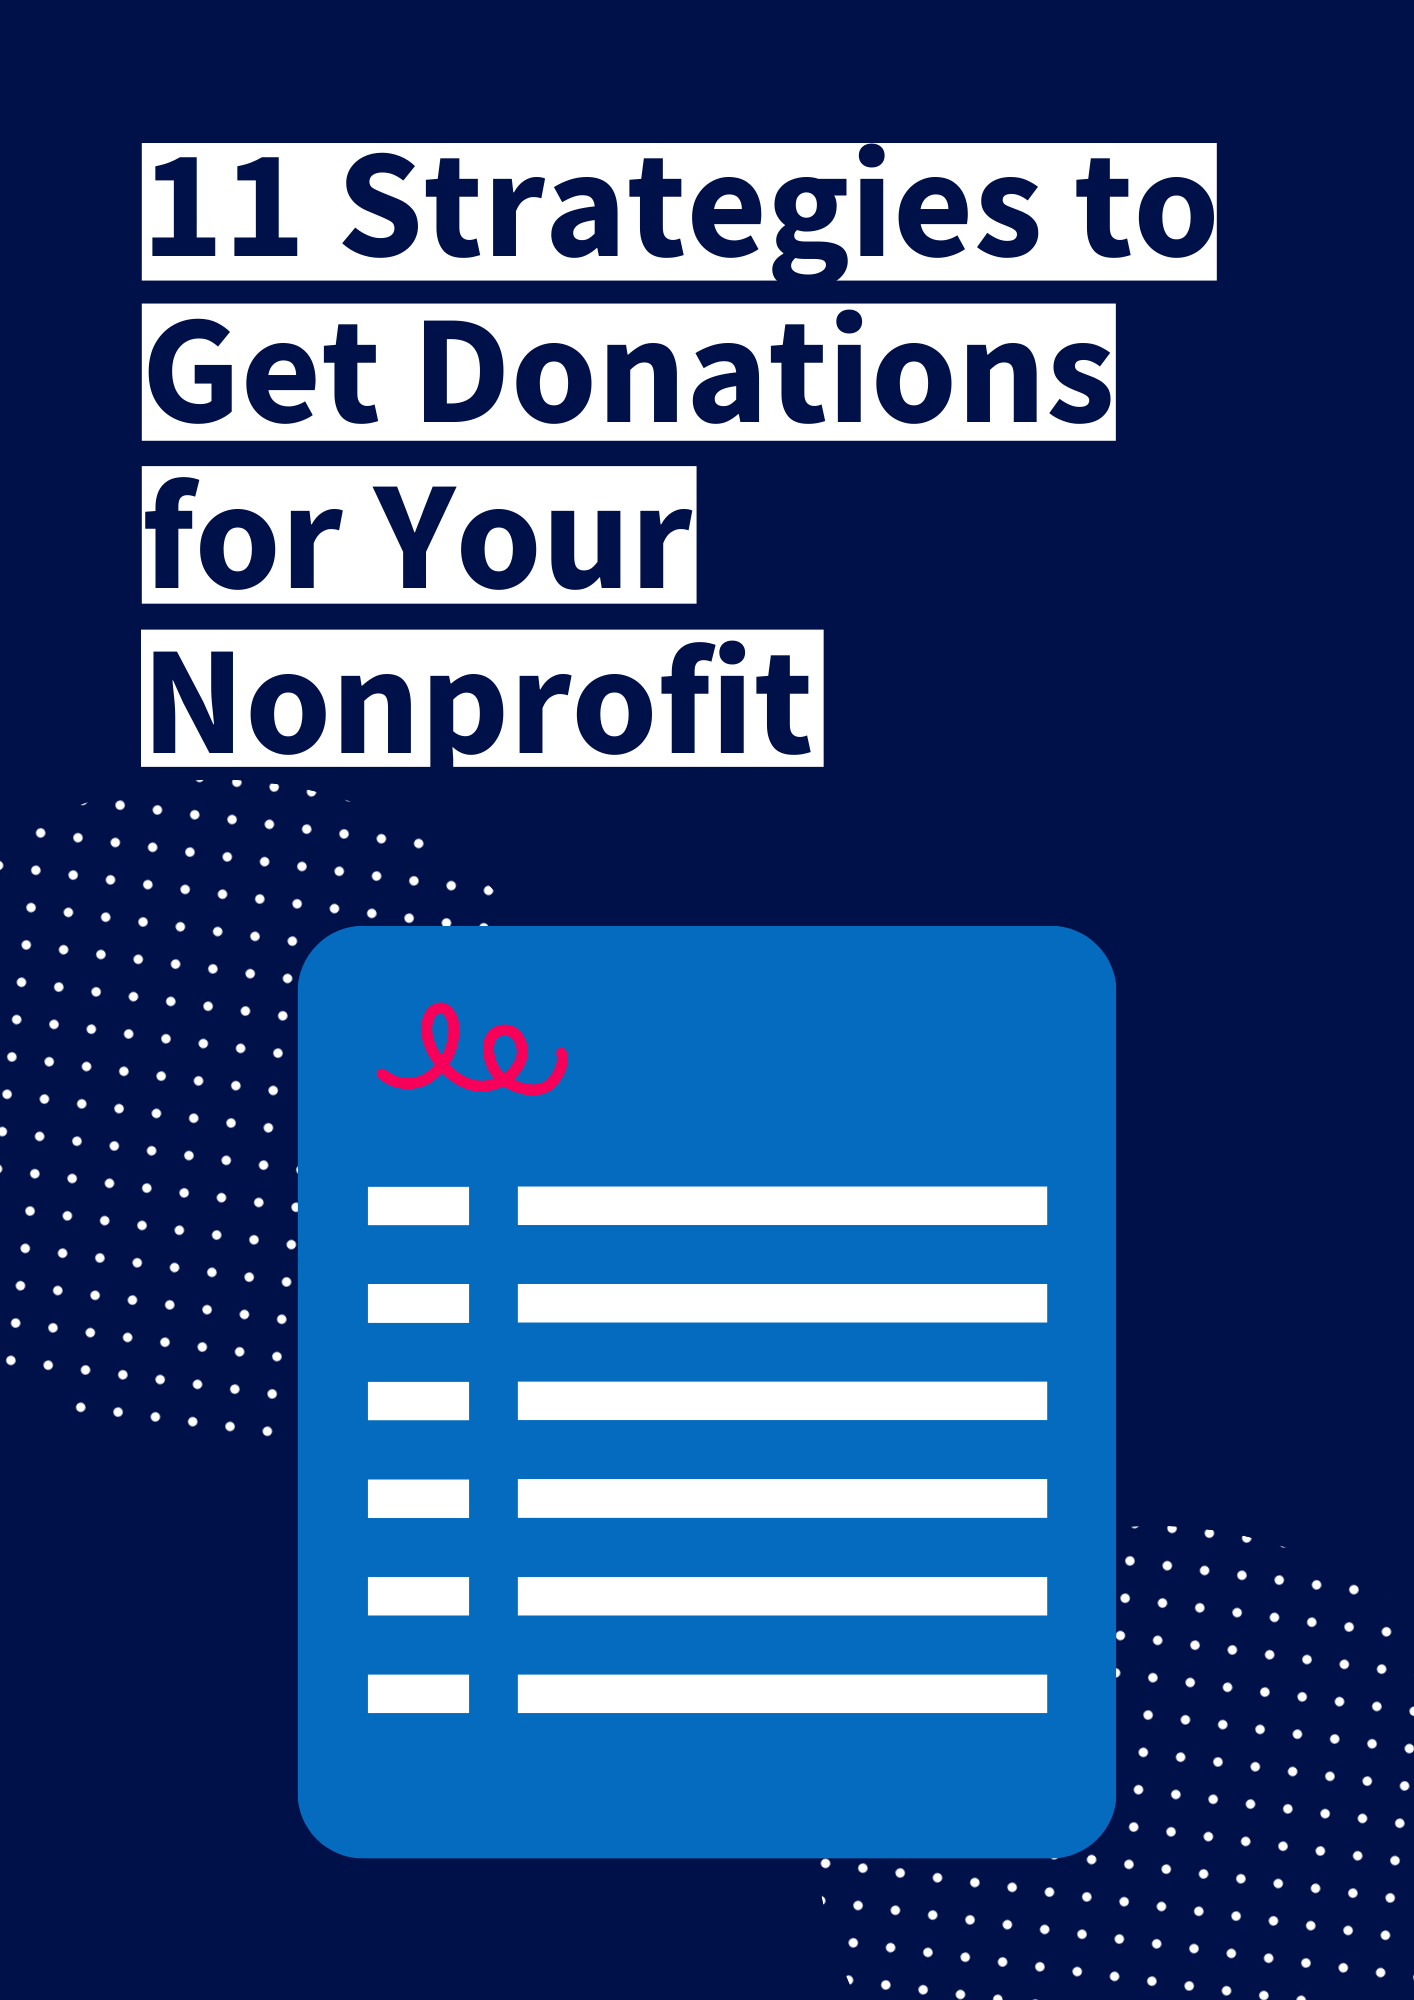 11 Strategies to Get Donations